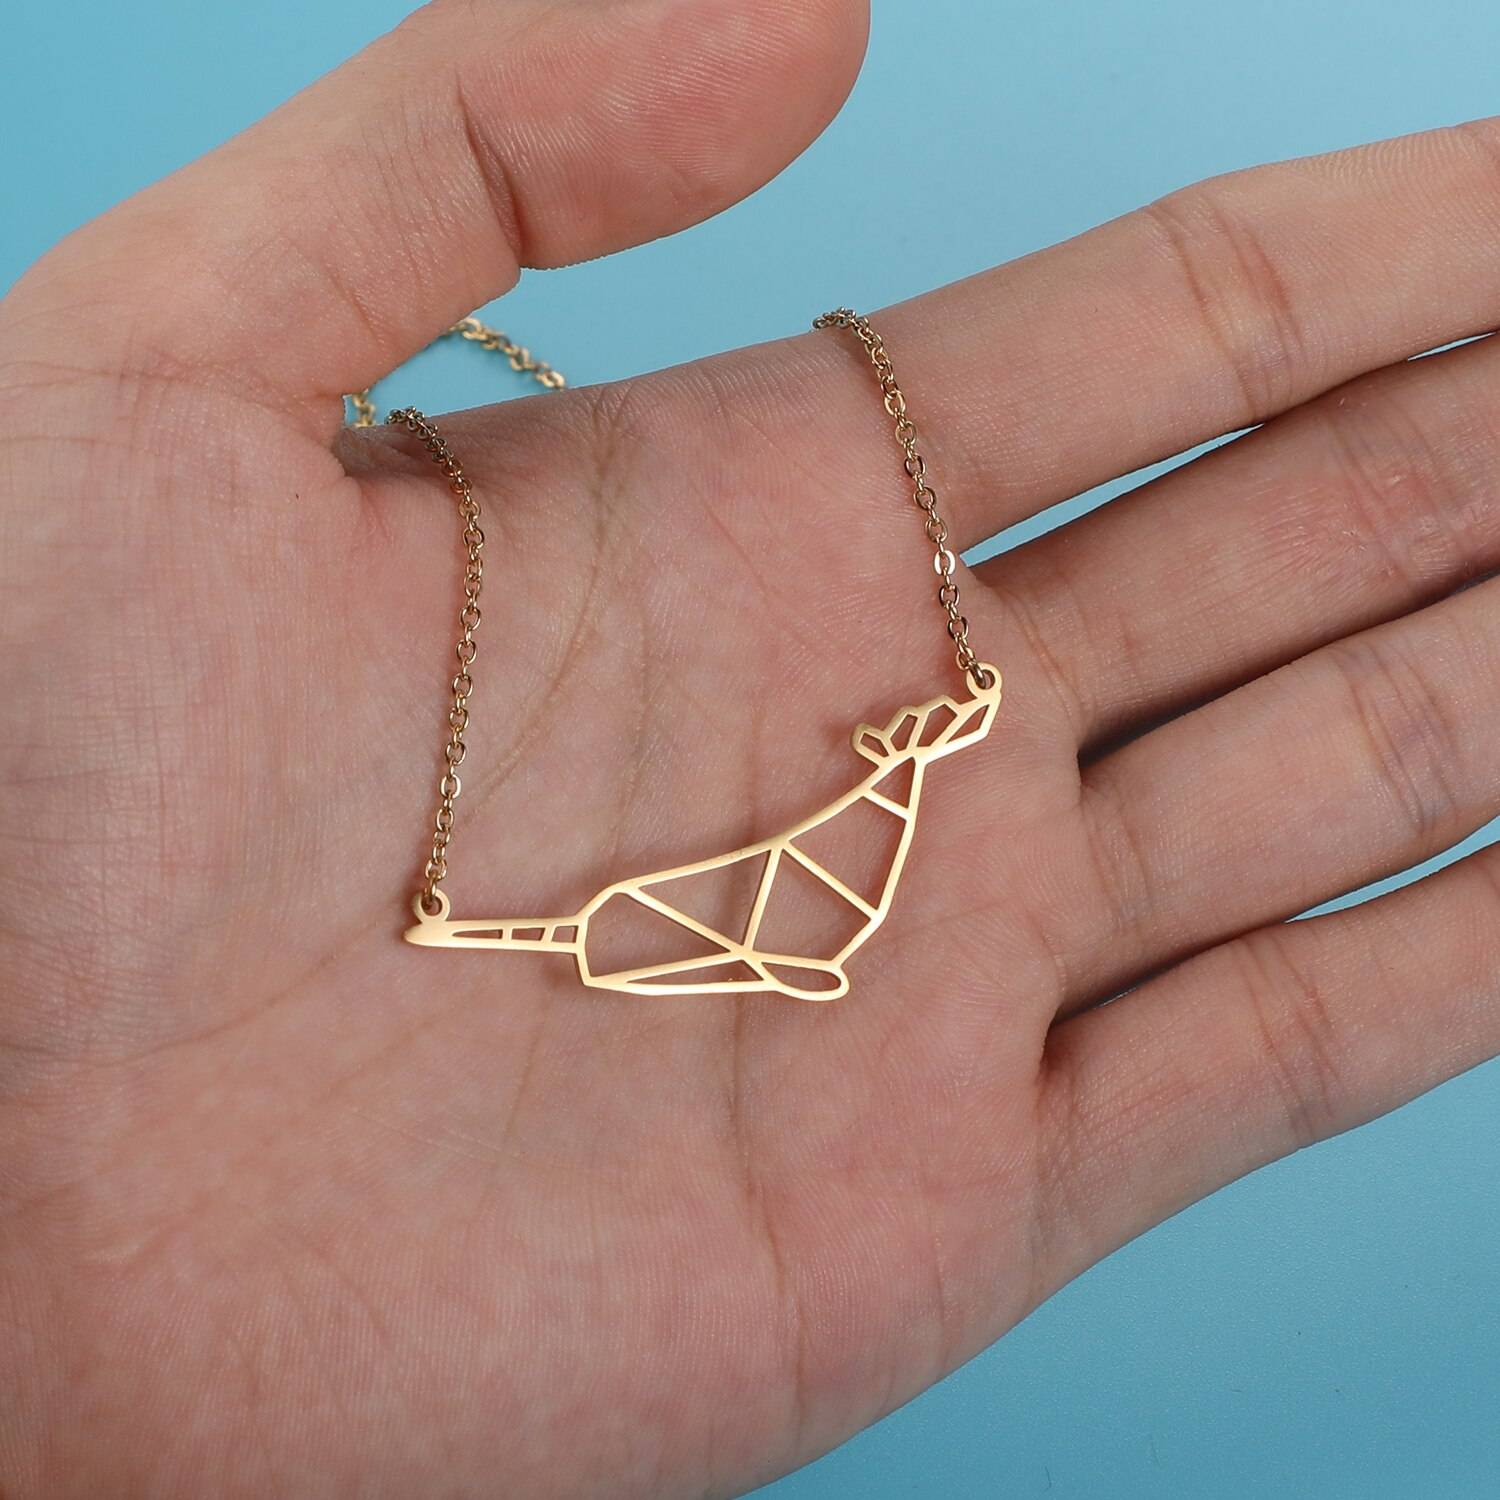 Magical Narwhal Origami Necklace on hand